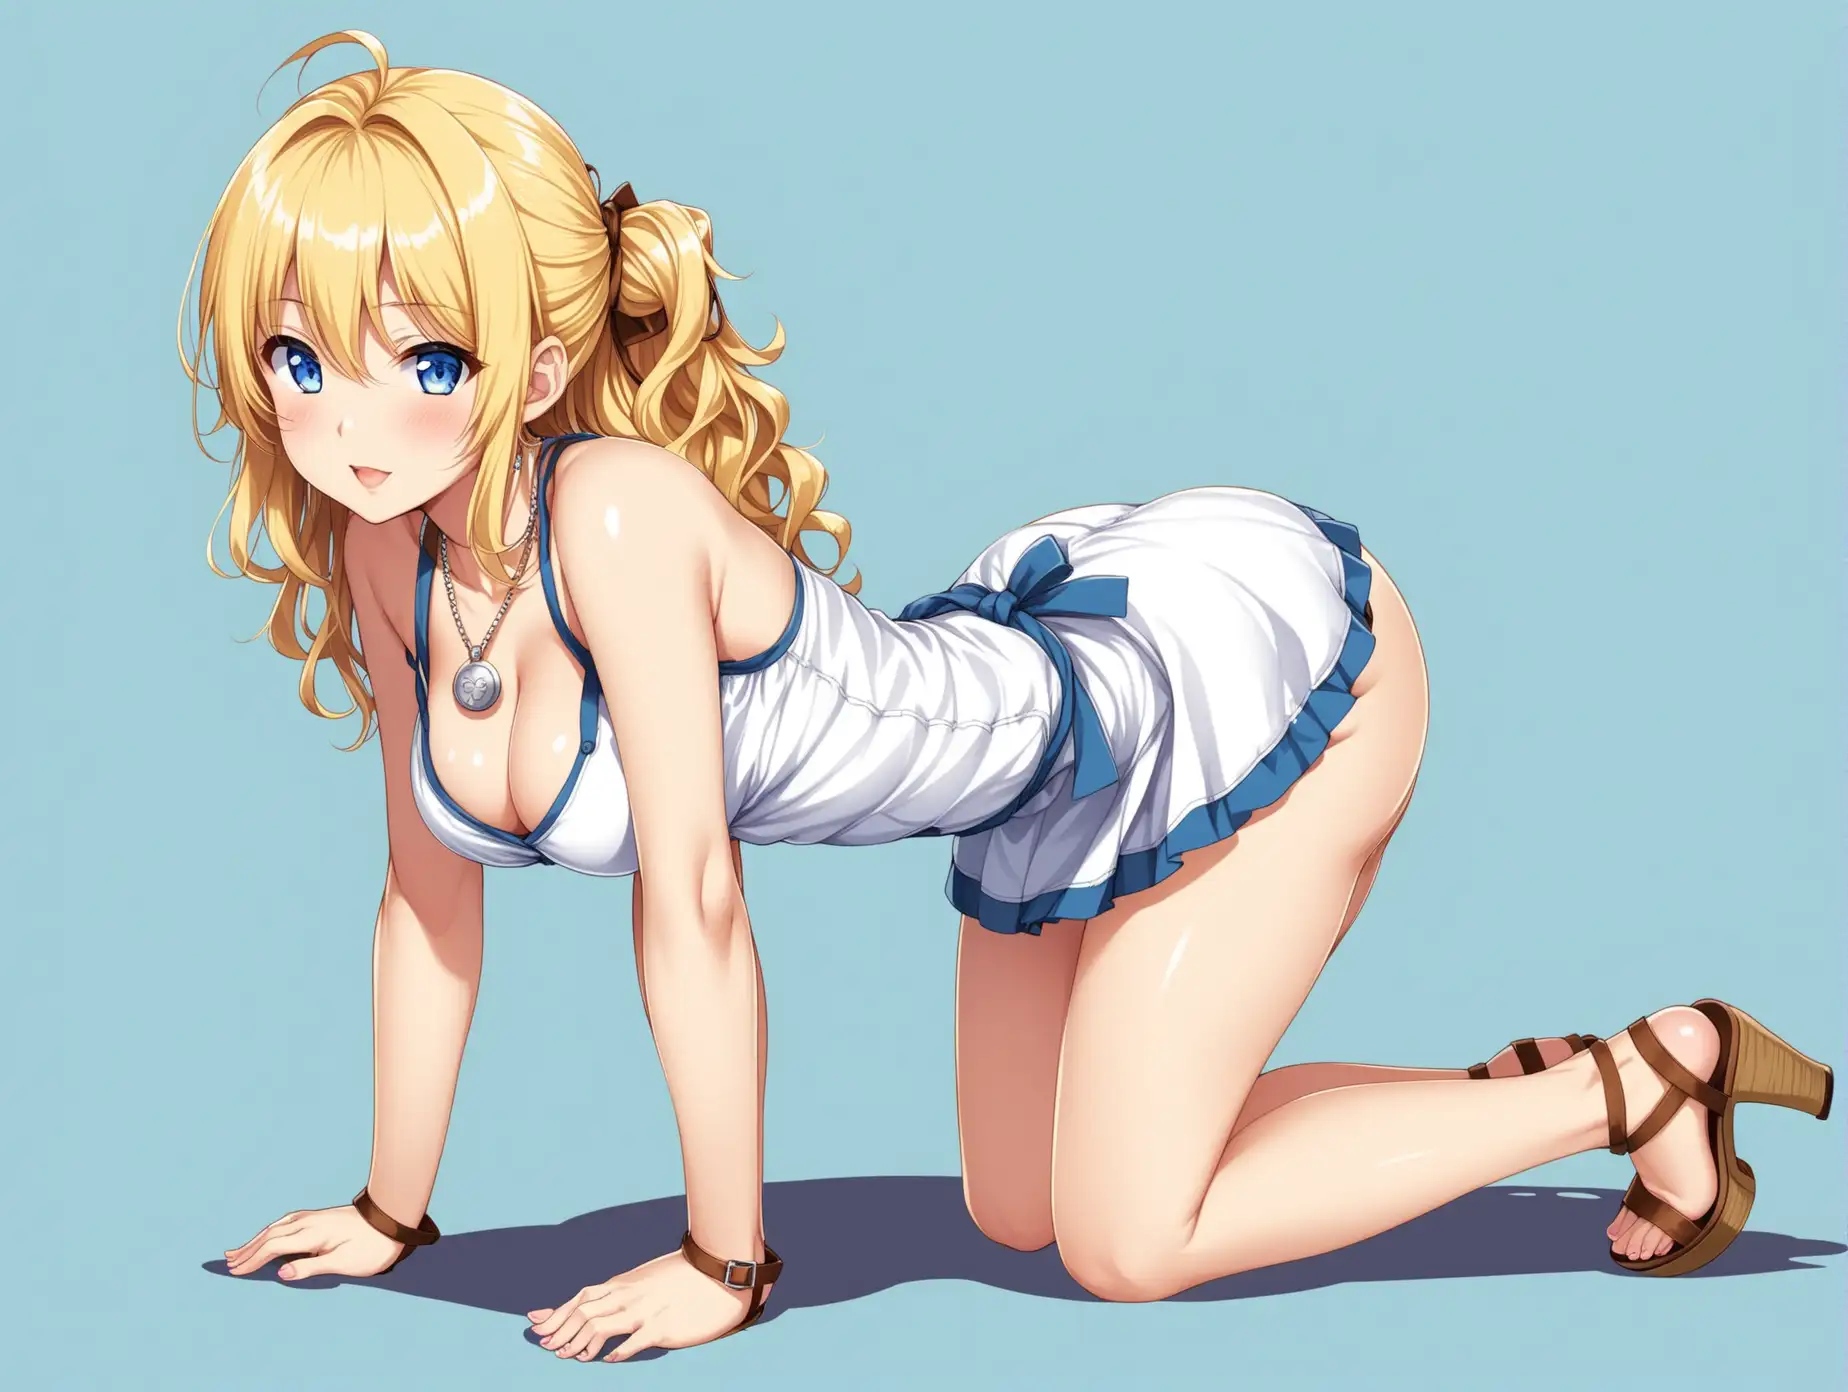 Full body image of a sensual anime girl, farmer outfit, on fours position, lifted rear, showing buttocks, age 20, short height, breasts size DDD, large hips, wavy hair, blonde, mid length hair, tied hair, blue eyes, short dress, high heels wedges sandals, necklace